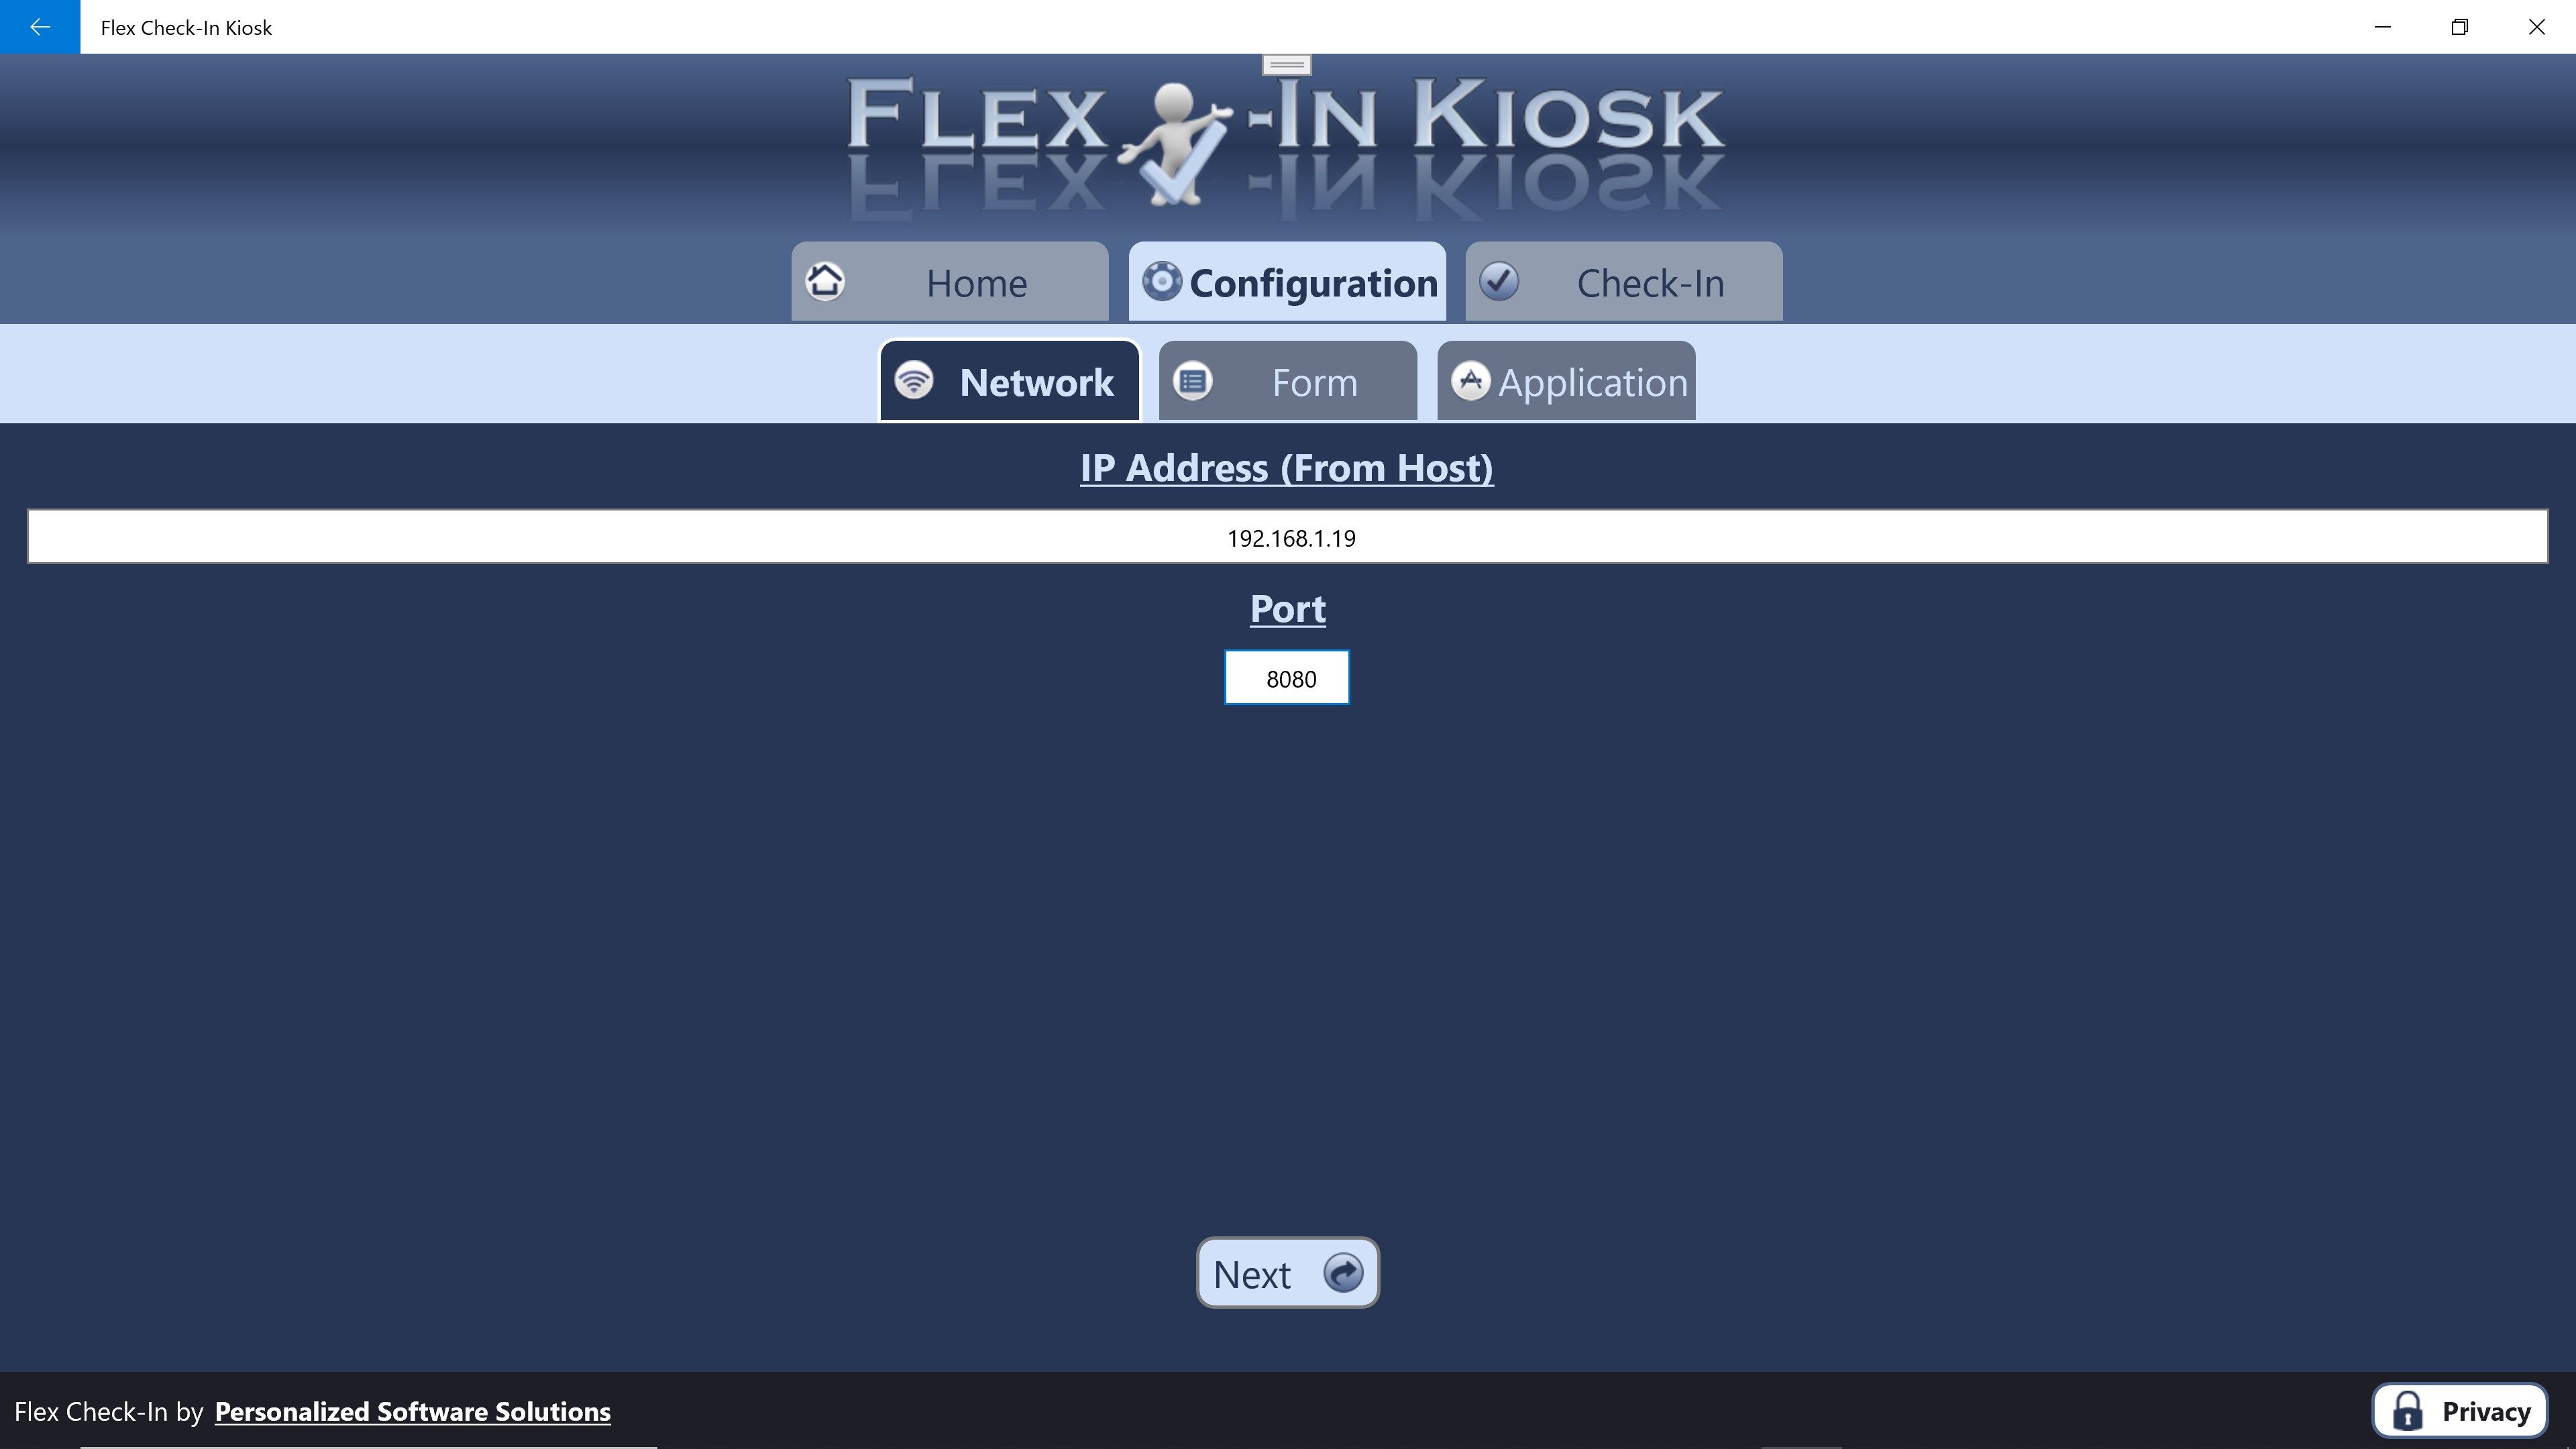 Enter the IP address and port as found on the Flex Check-In Host application.